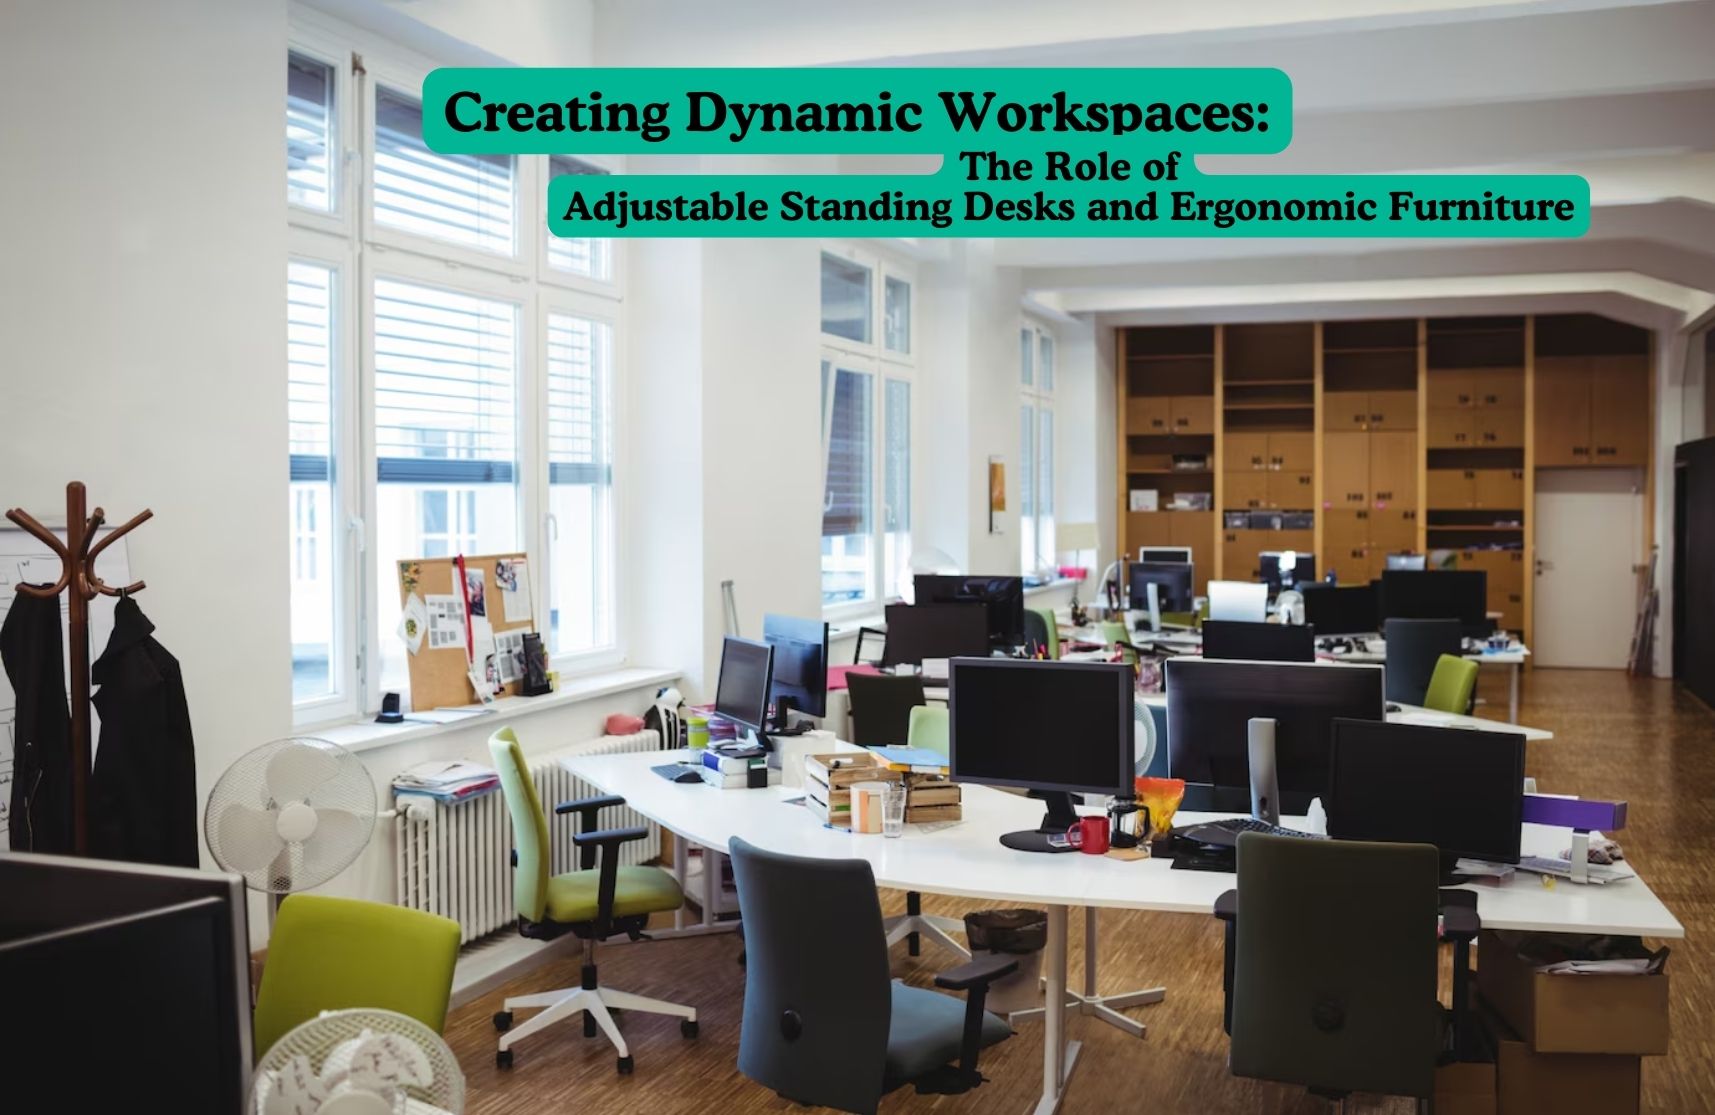 Creating Dynamic Workspaces: The Role of Adjustable Standing Desks and Ergonomic Furniture